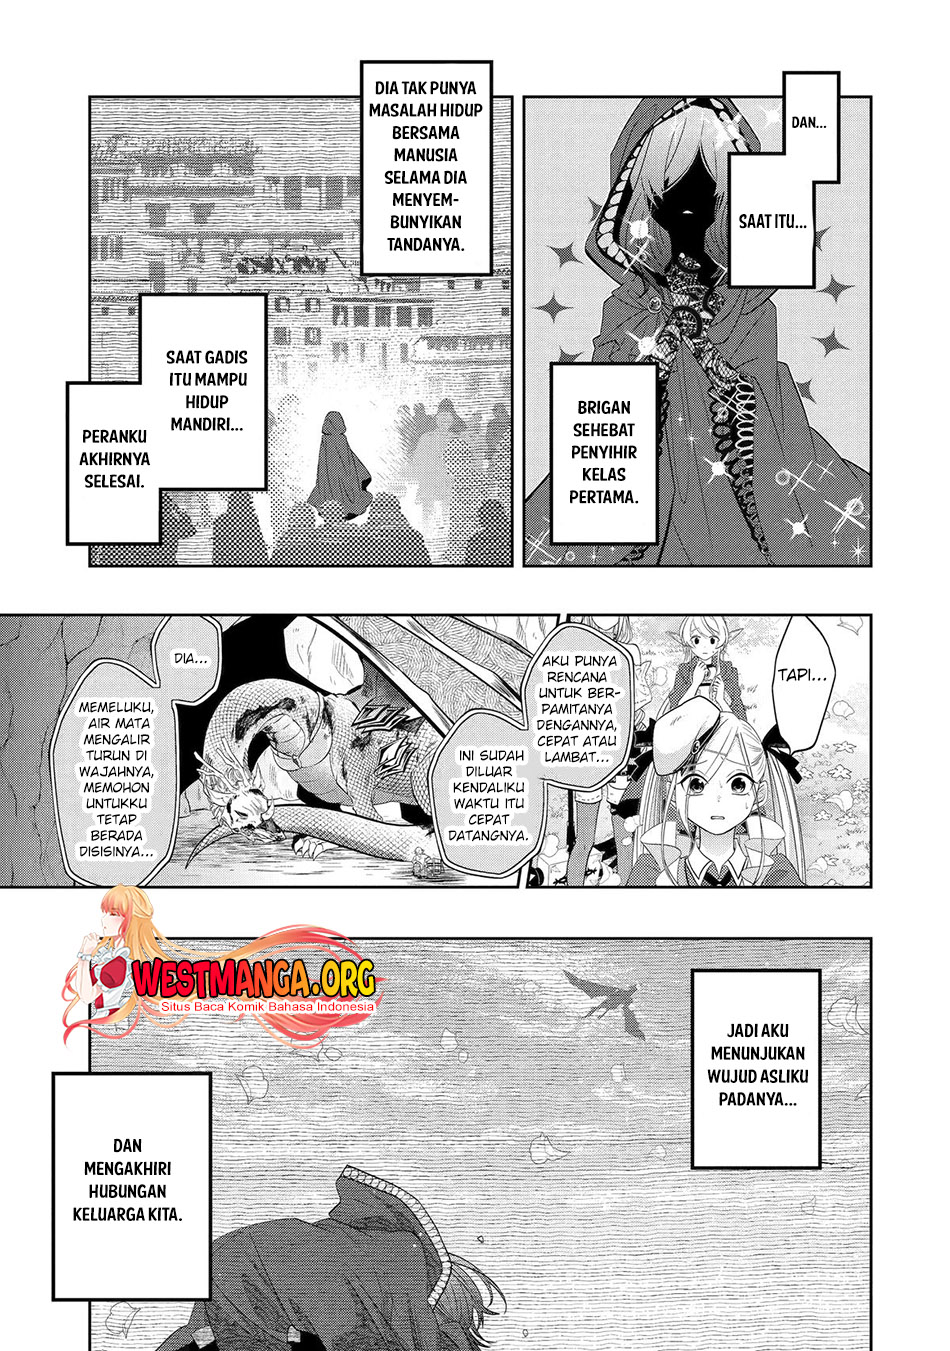 Level 0 Evil King Become The Adventurer In The New World Chapter 21